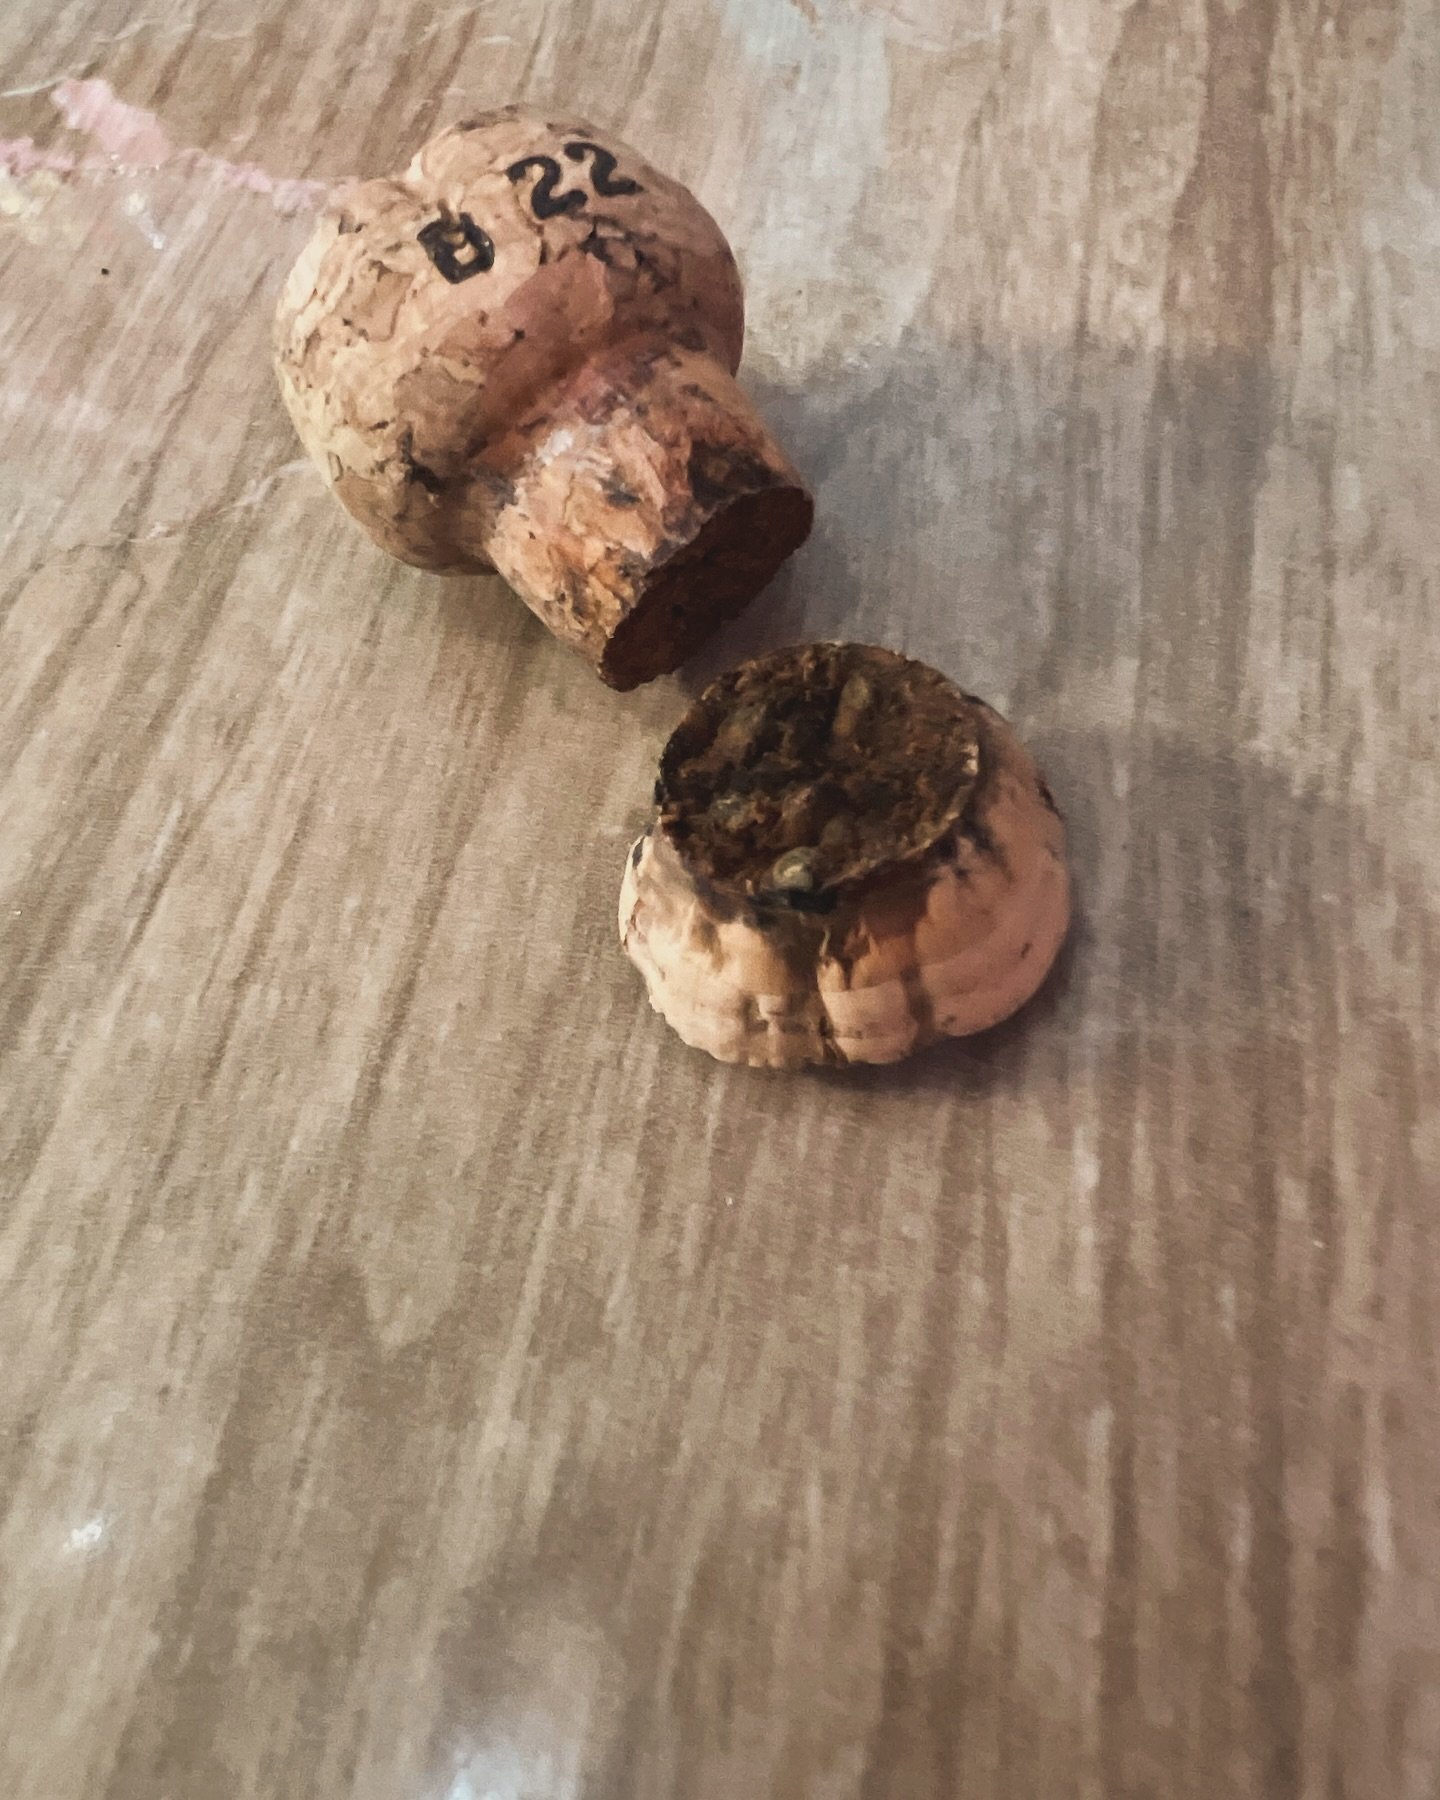 The craziest split cork we&rsquo;ve ever seen. Have you even seen anything like this?
.
.
.
.
#brokencork #wine #champagne #goodbottle #sacramento